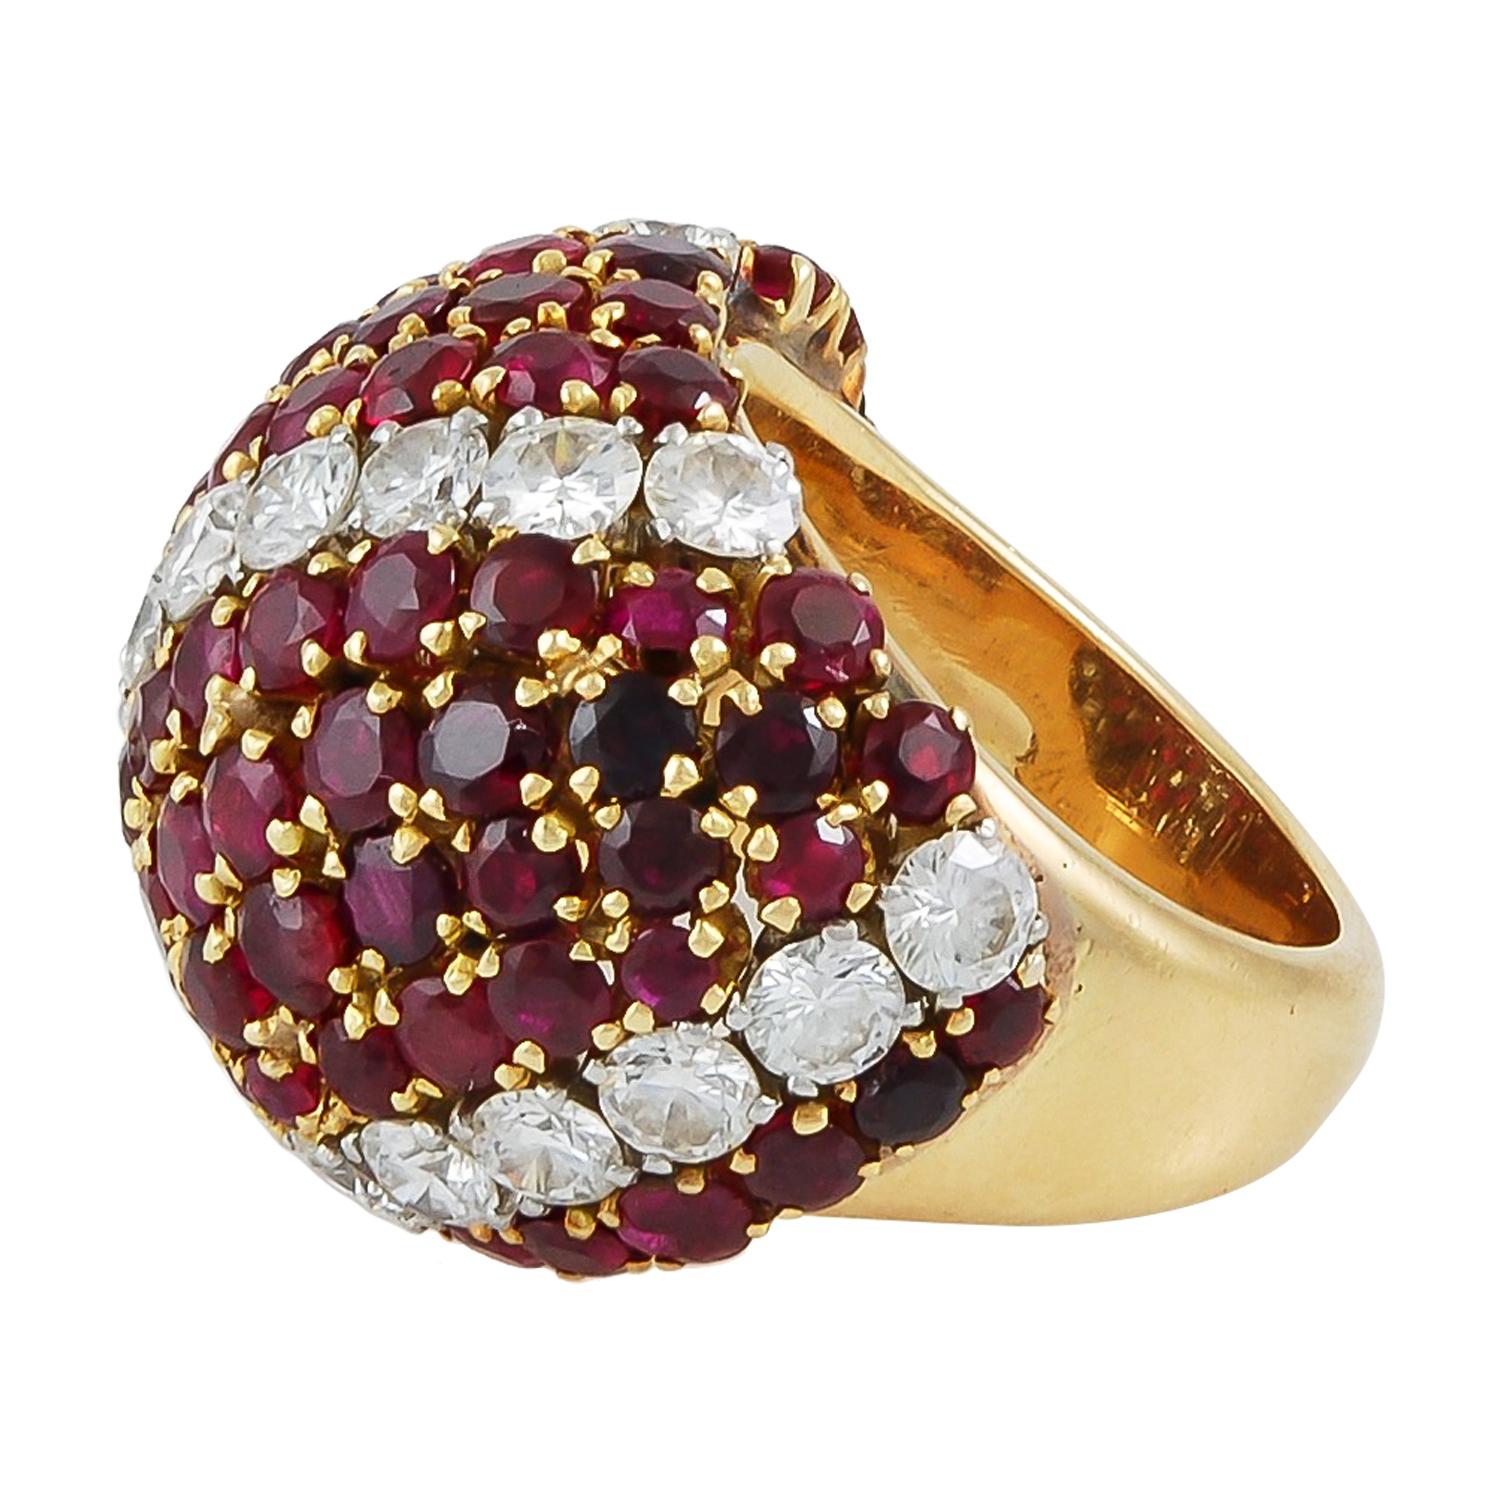 Van Cleef & Arpels Vintage 1950s 'Province' Ruby Bombe Ring
A bejeweled mid-century retro ring by Van Cleef & Arpels exhibiting a design emblematic of the Maison: the domed voluminous forms of ‘Pelouse’ (in some books this look is also referred to